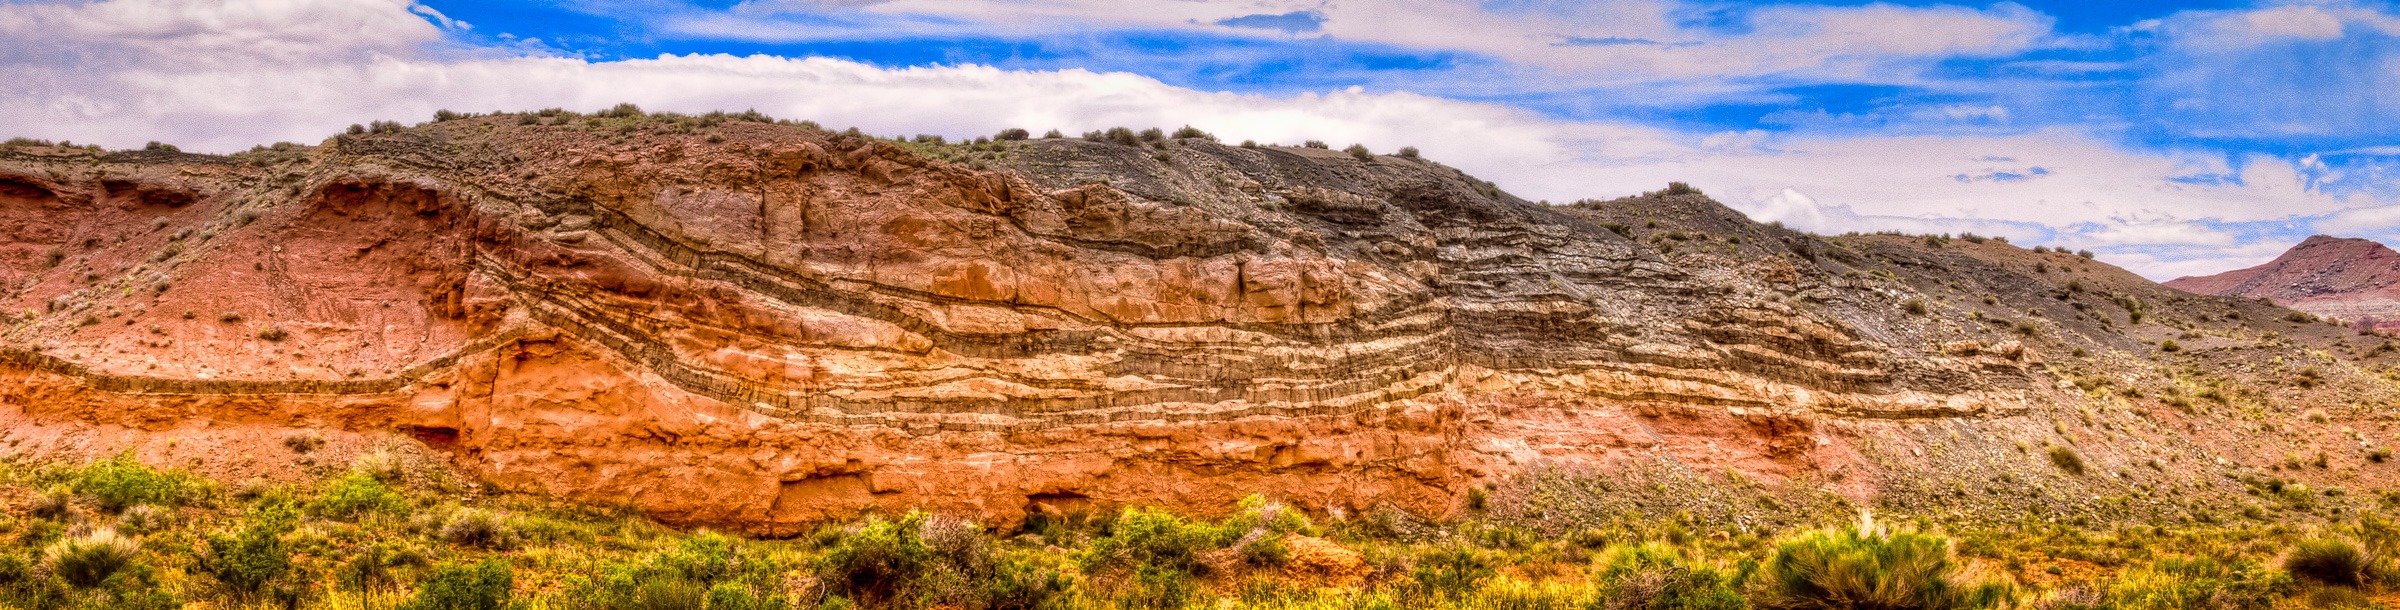 Numerous intrusions of lava between layers of sandstone in the Catheral Valley section of Capitol Reef National Park.